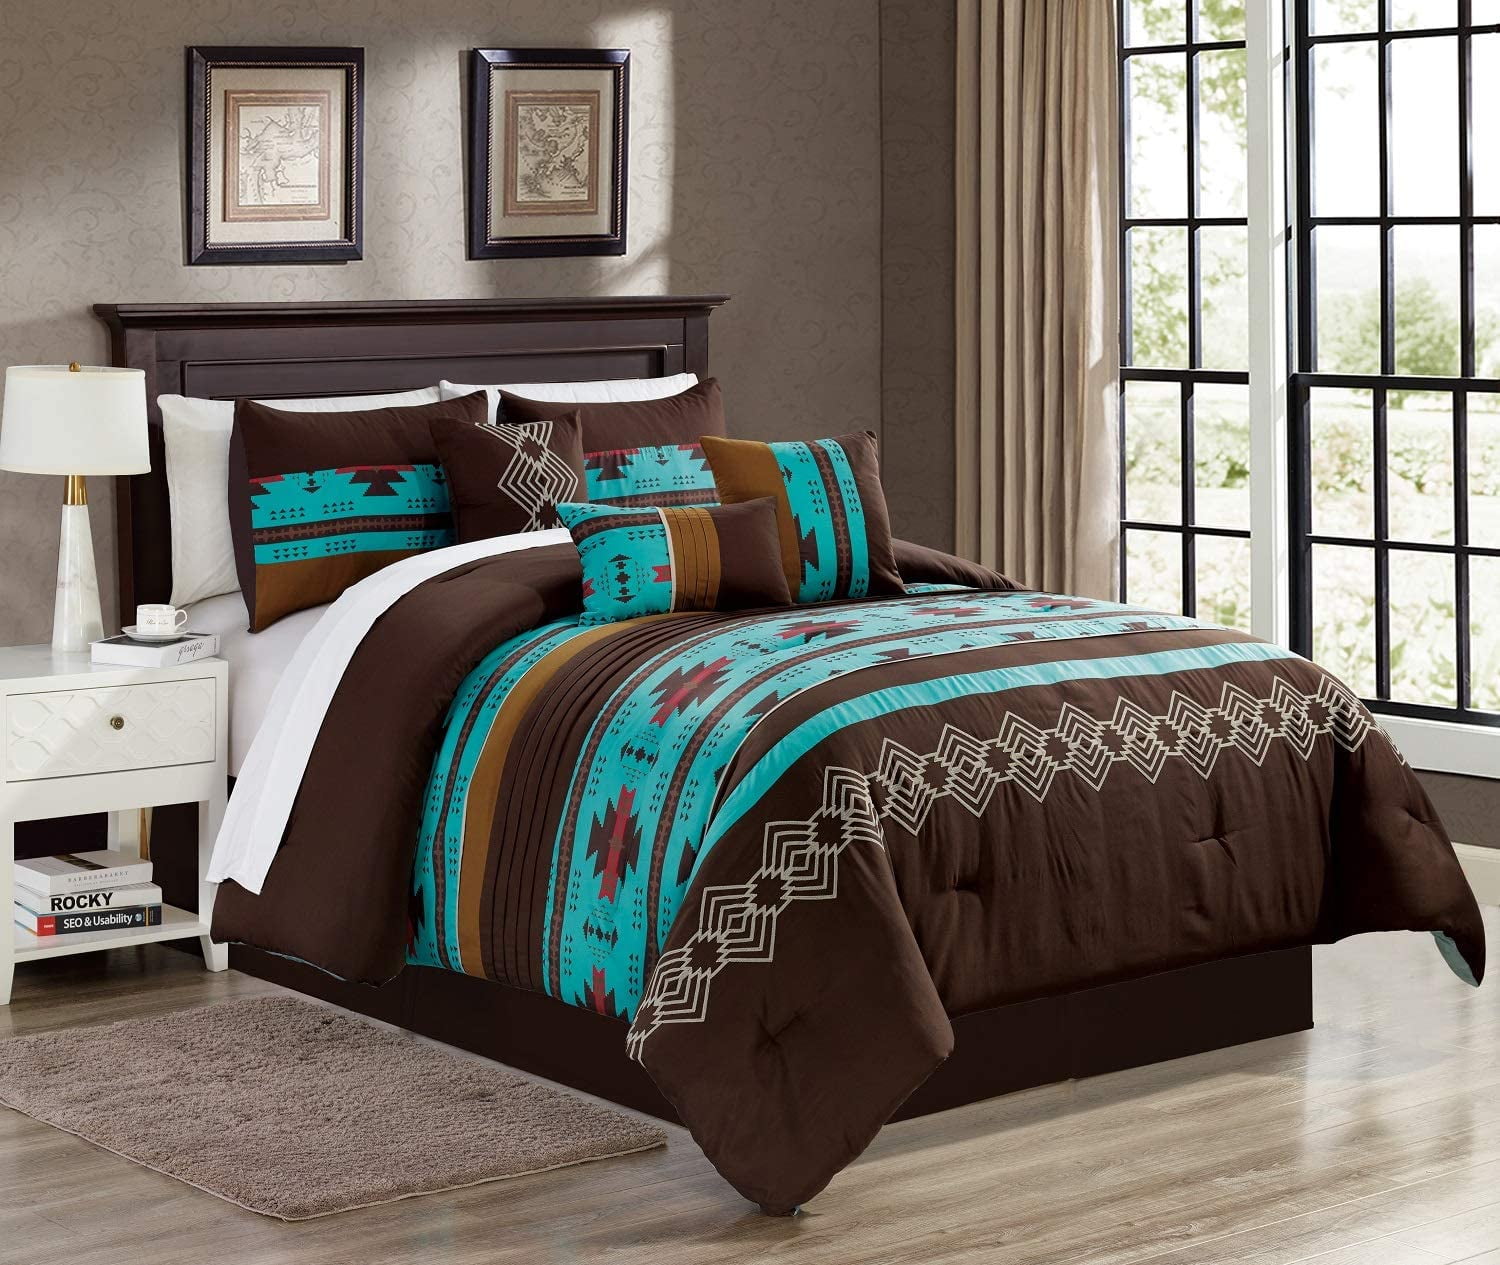 Details about   MERRY HOME Comforter Set 10 Piece Comforter Bedding Set with Sheet Set Fit 14" 